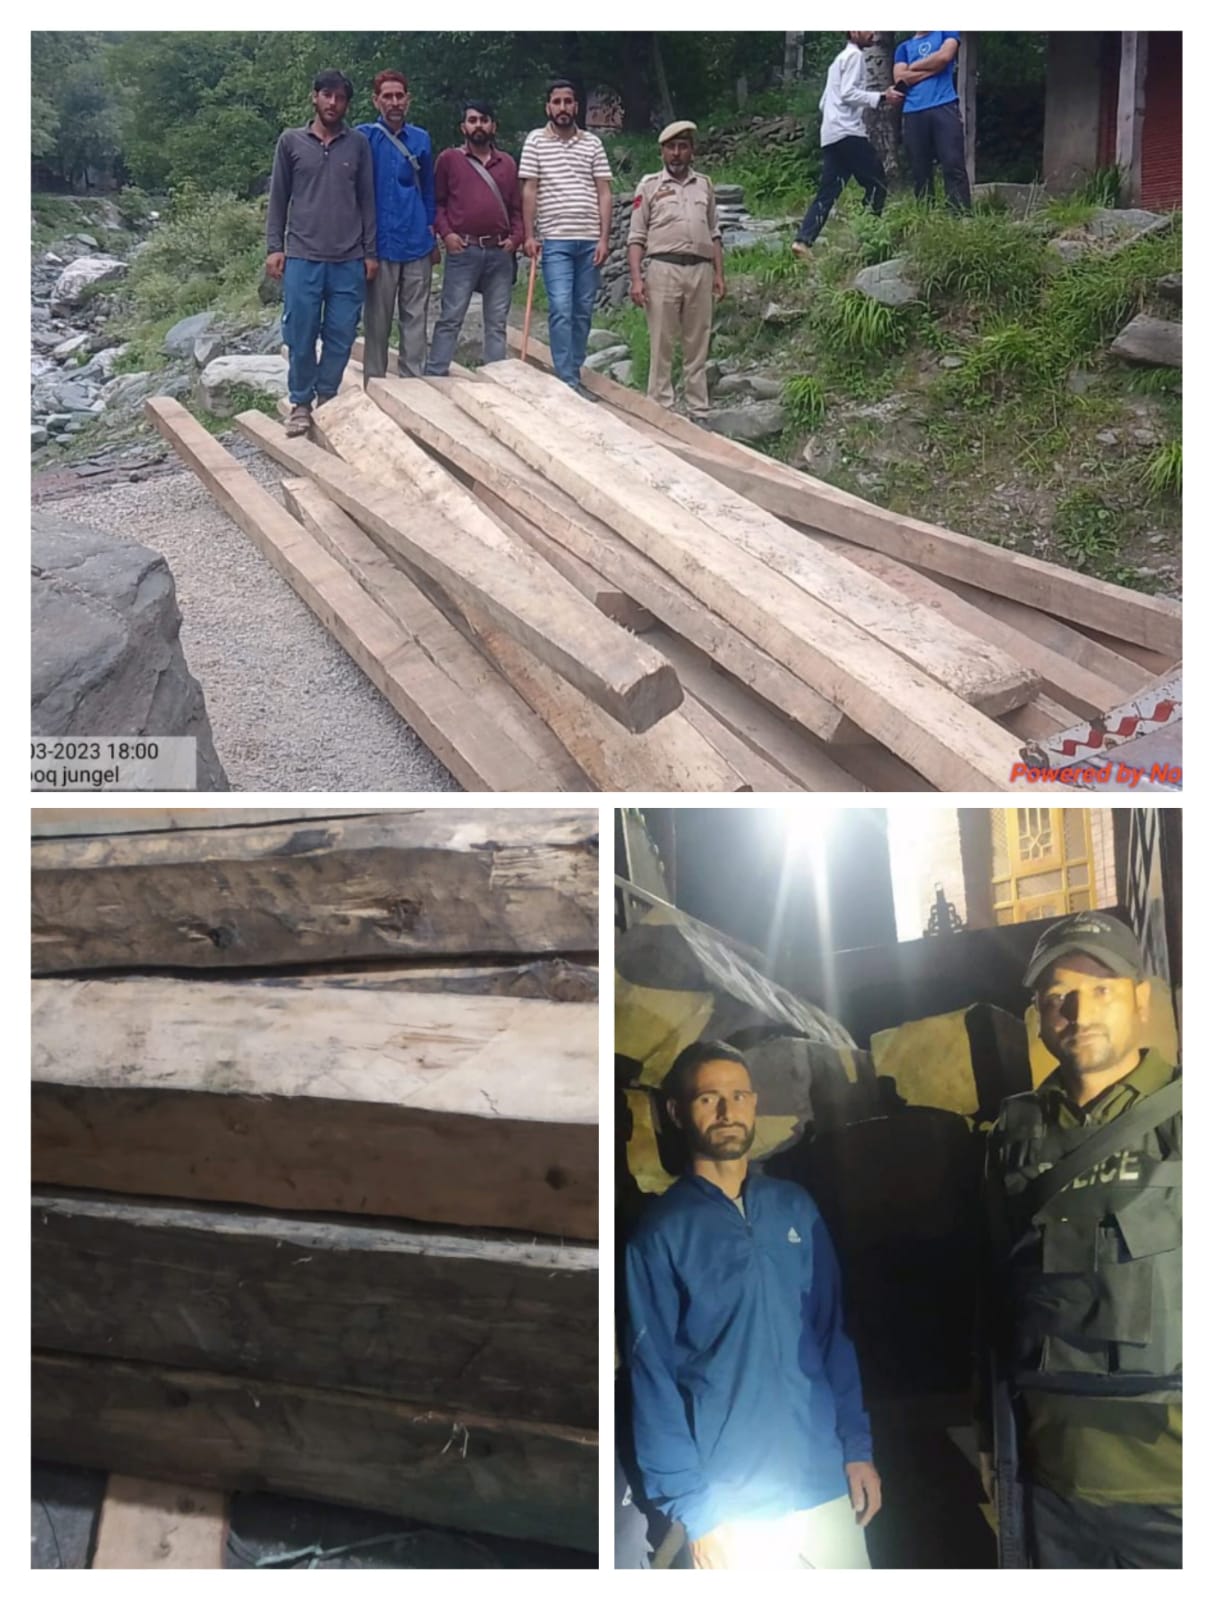 3 held for timber smuggling in Baramulla